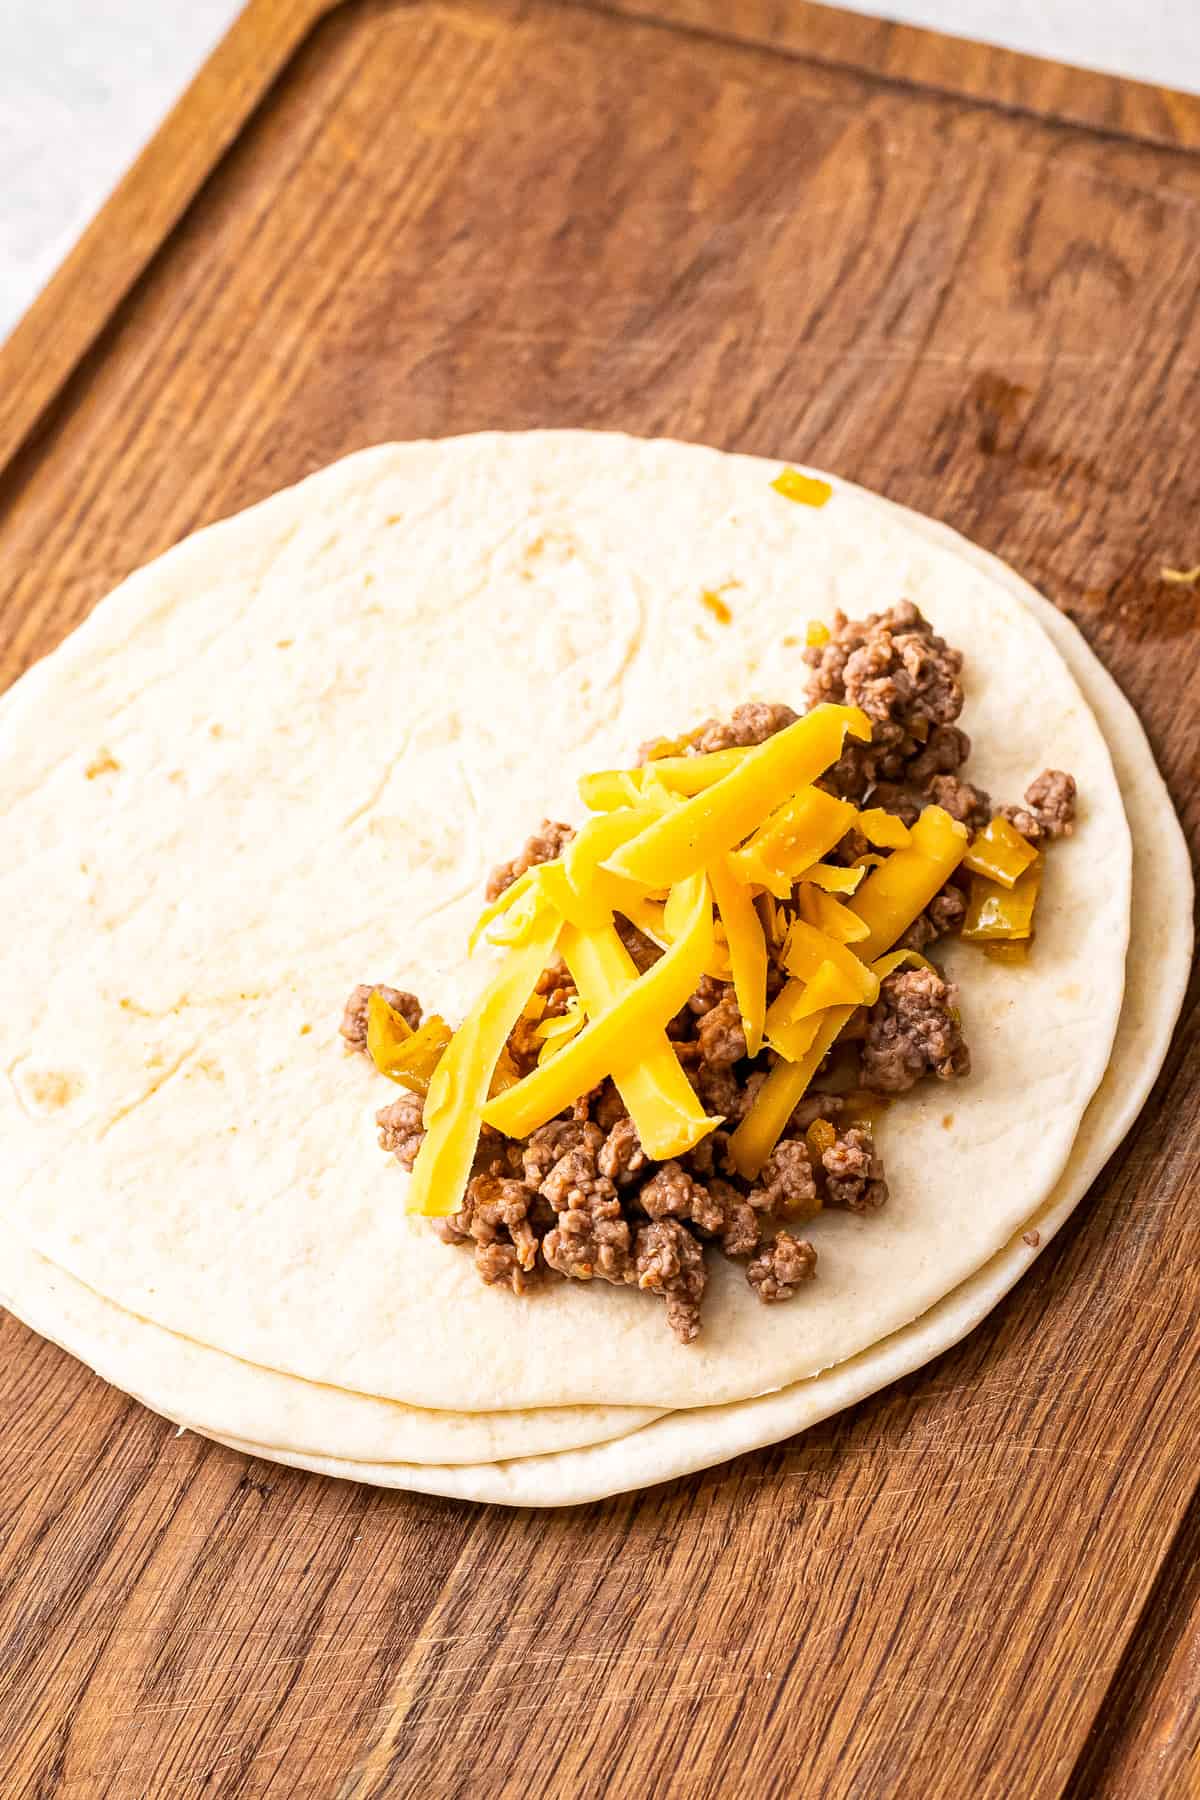 Soft tortilla with ground beef, chiles and cheese on top